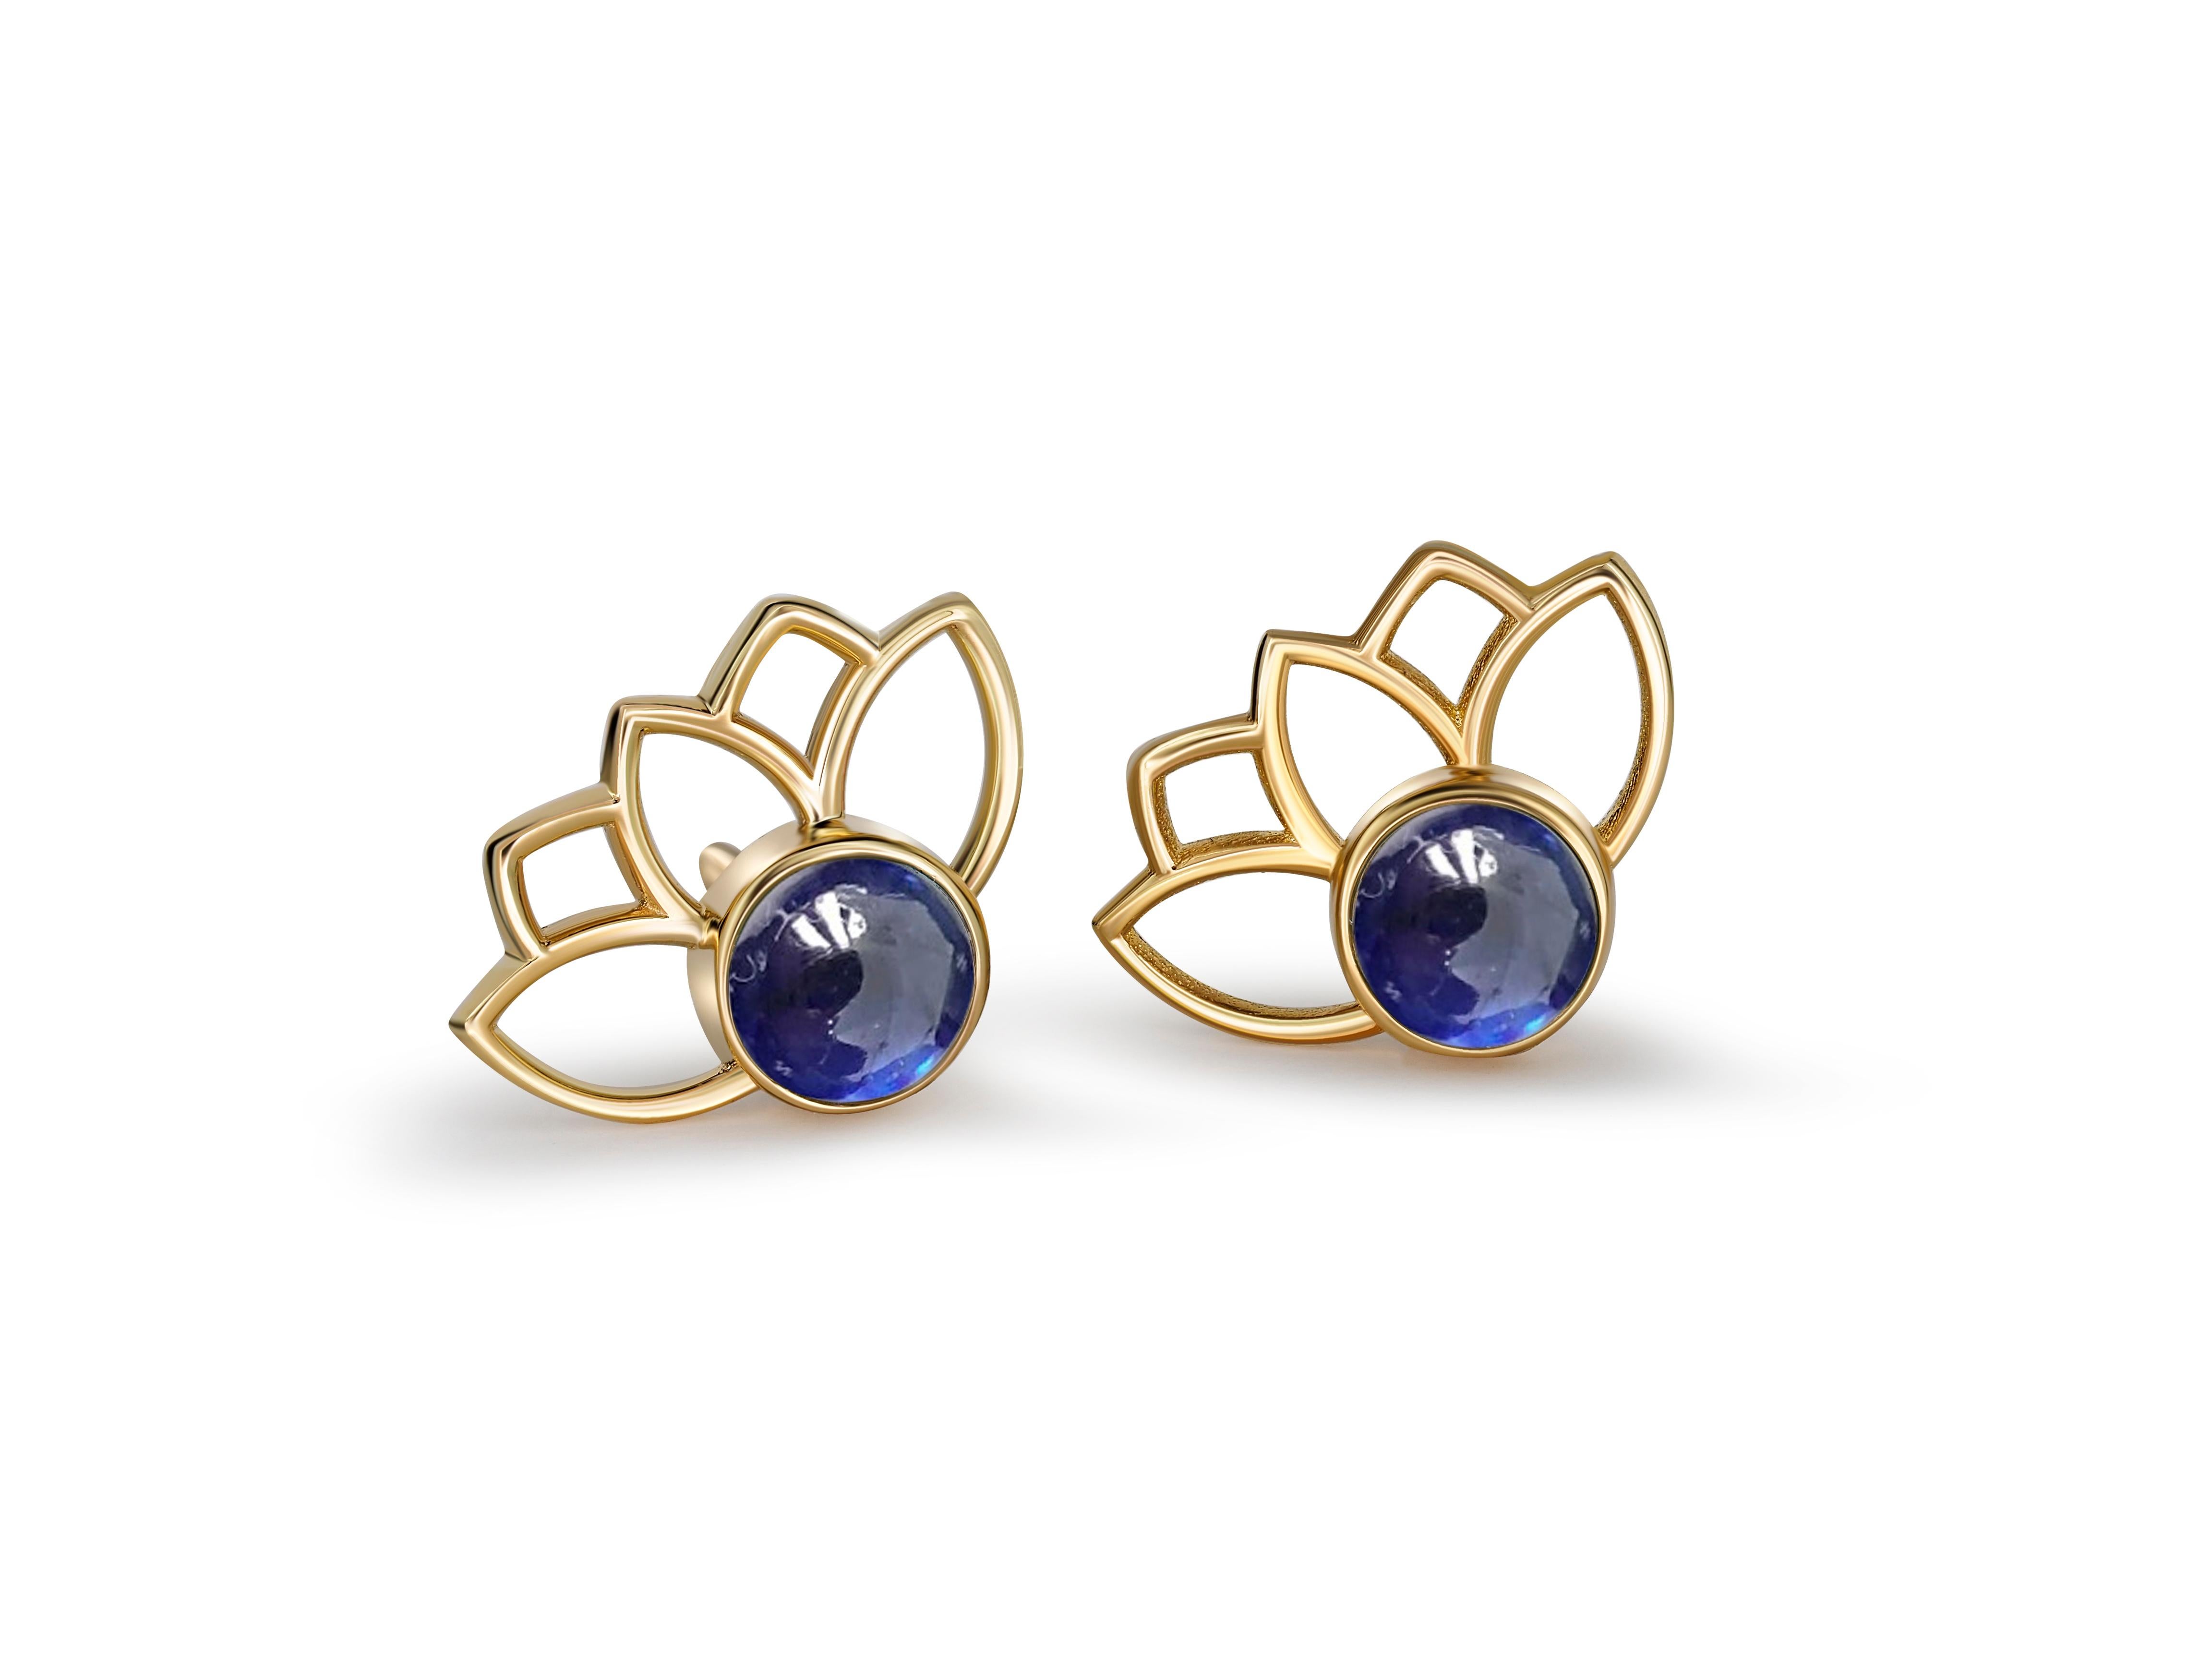 Modern Lotus Earrings Studs with Sapphires in 14k Gold, Blue Sapphire Gold Earrings For Sale